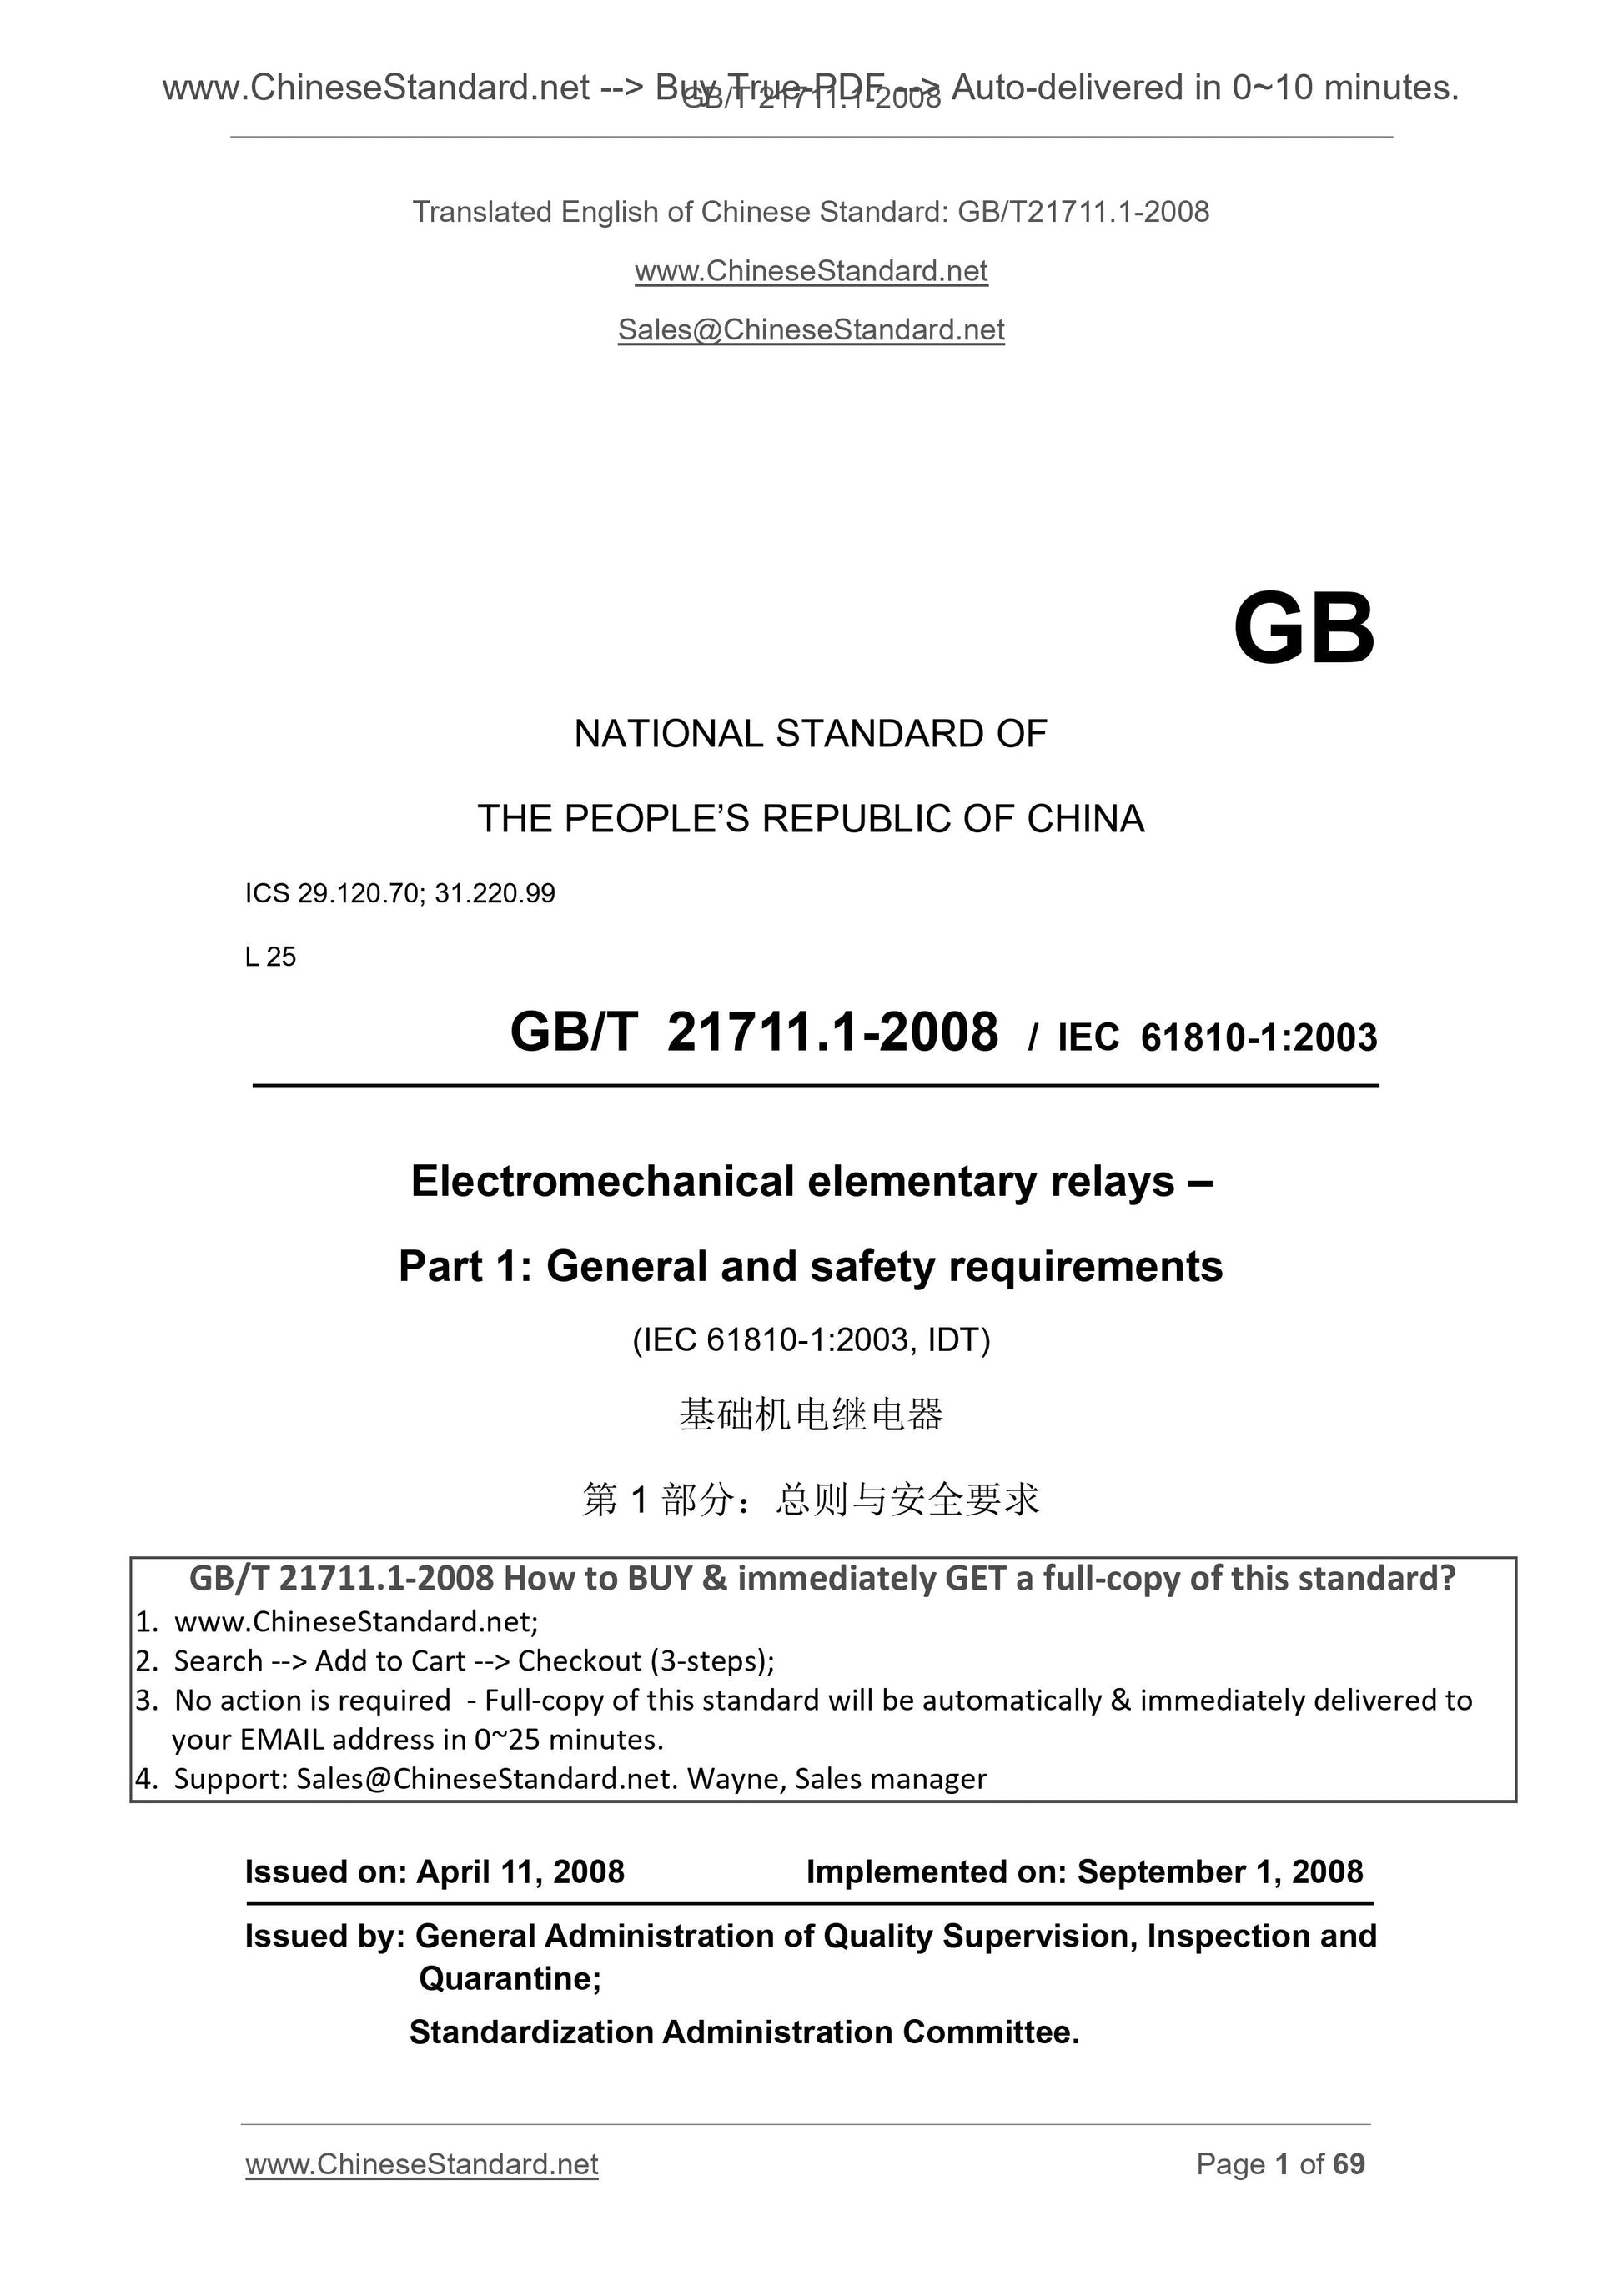 GB/T 21711.1-2008 Page 1